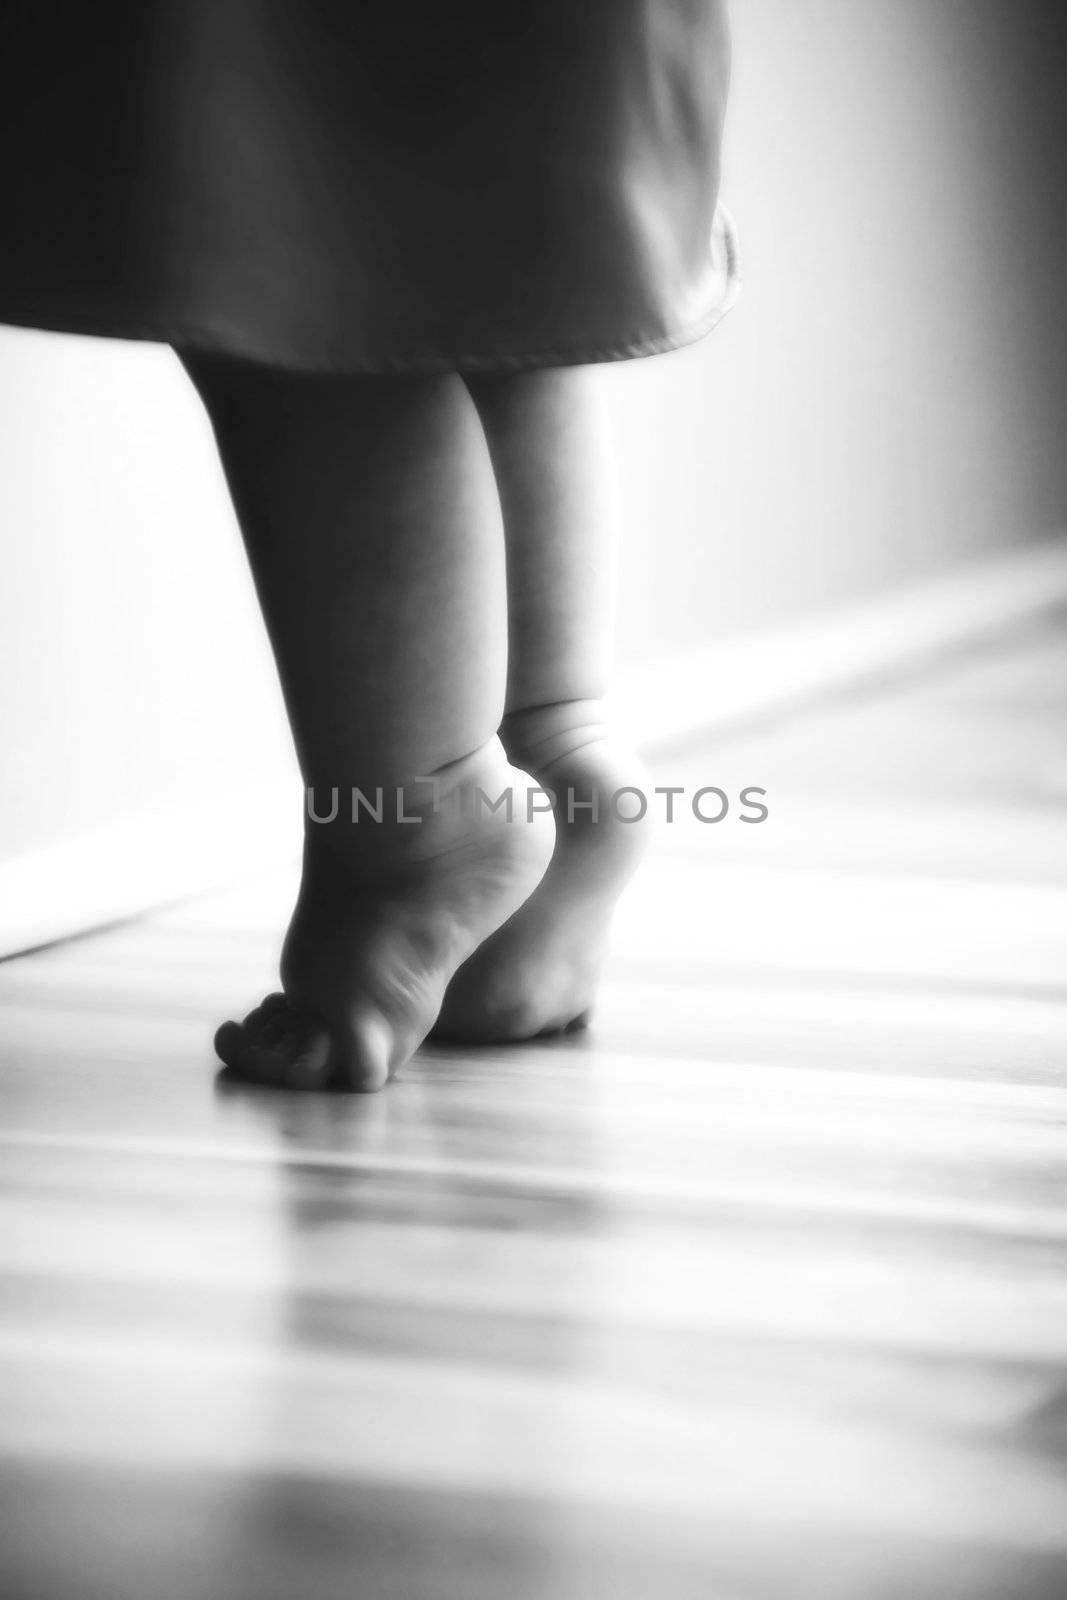 Baby Feet Stretching on Wooden Floor black and white by pictureguy